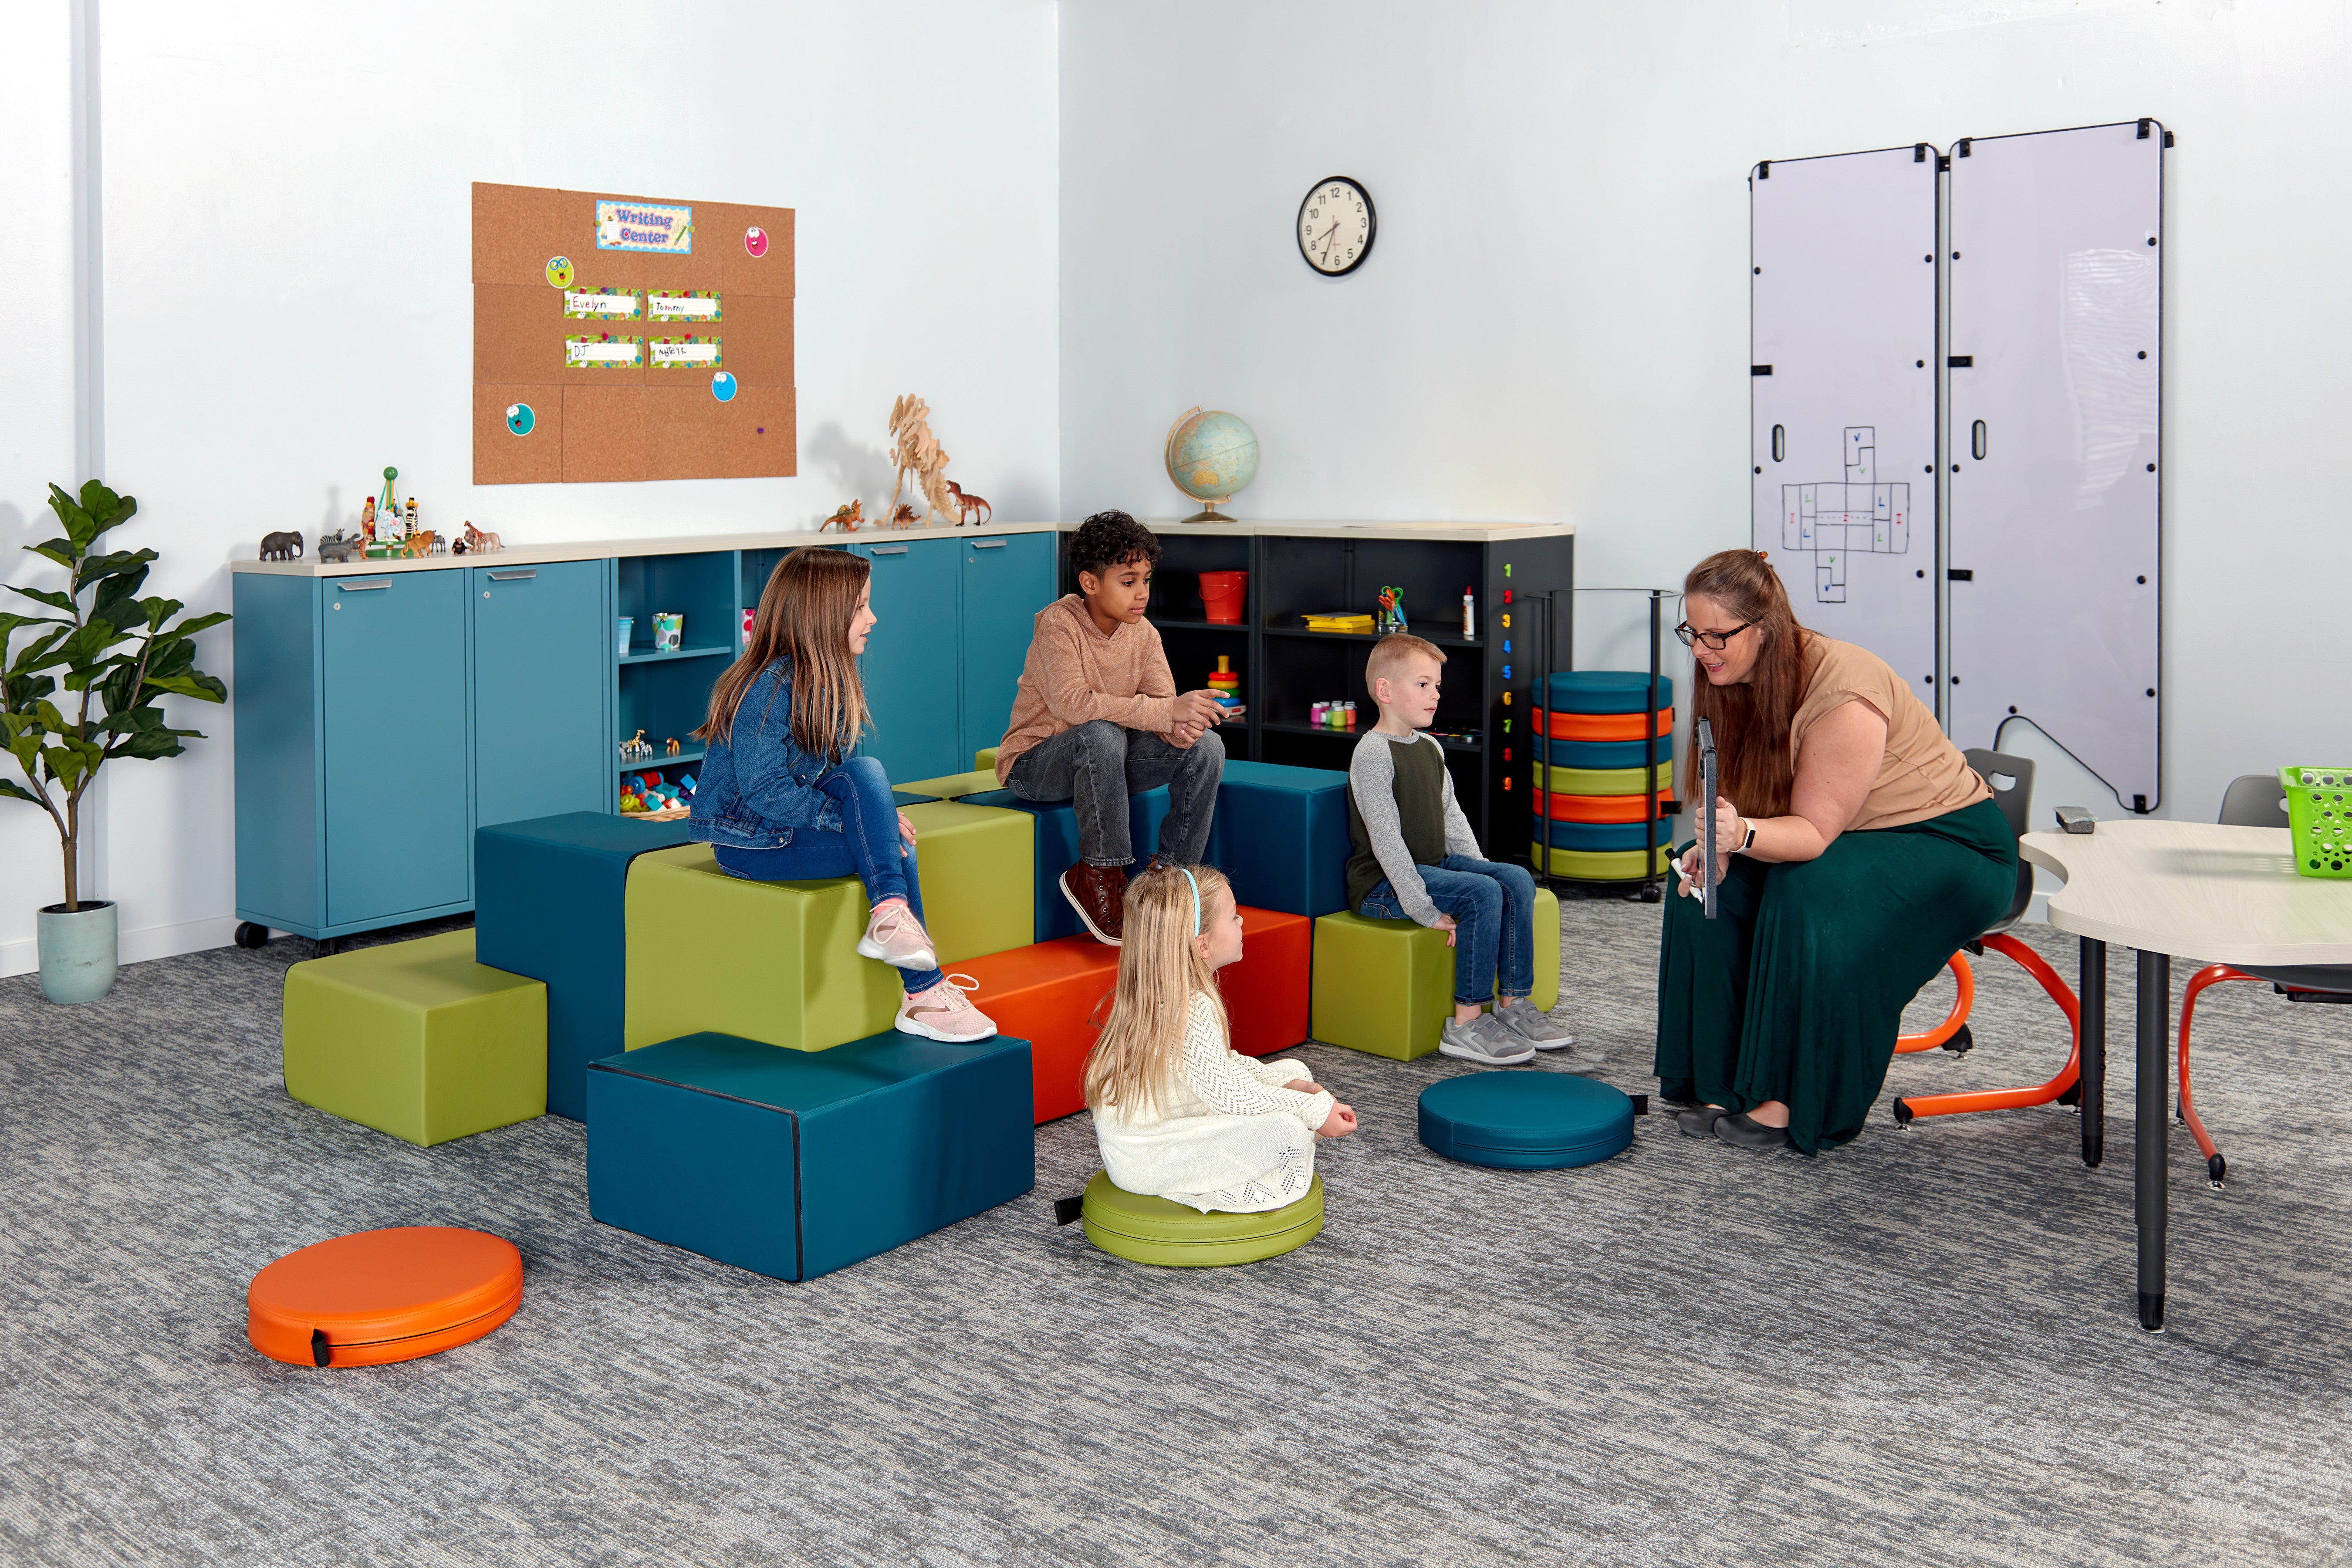 Kids sitting on modular seating system while focusing on the teacher